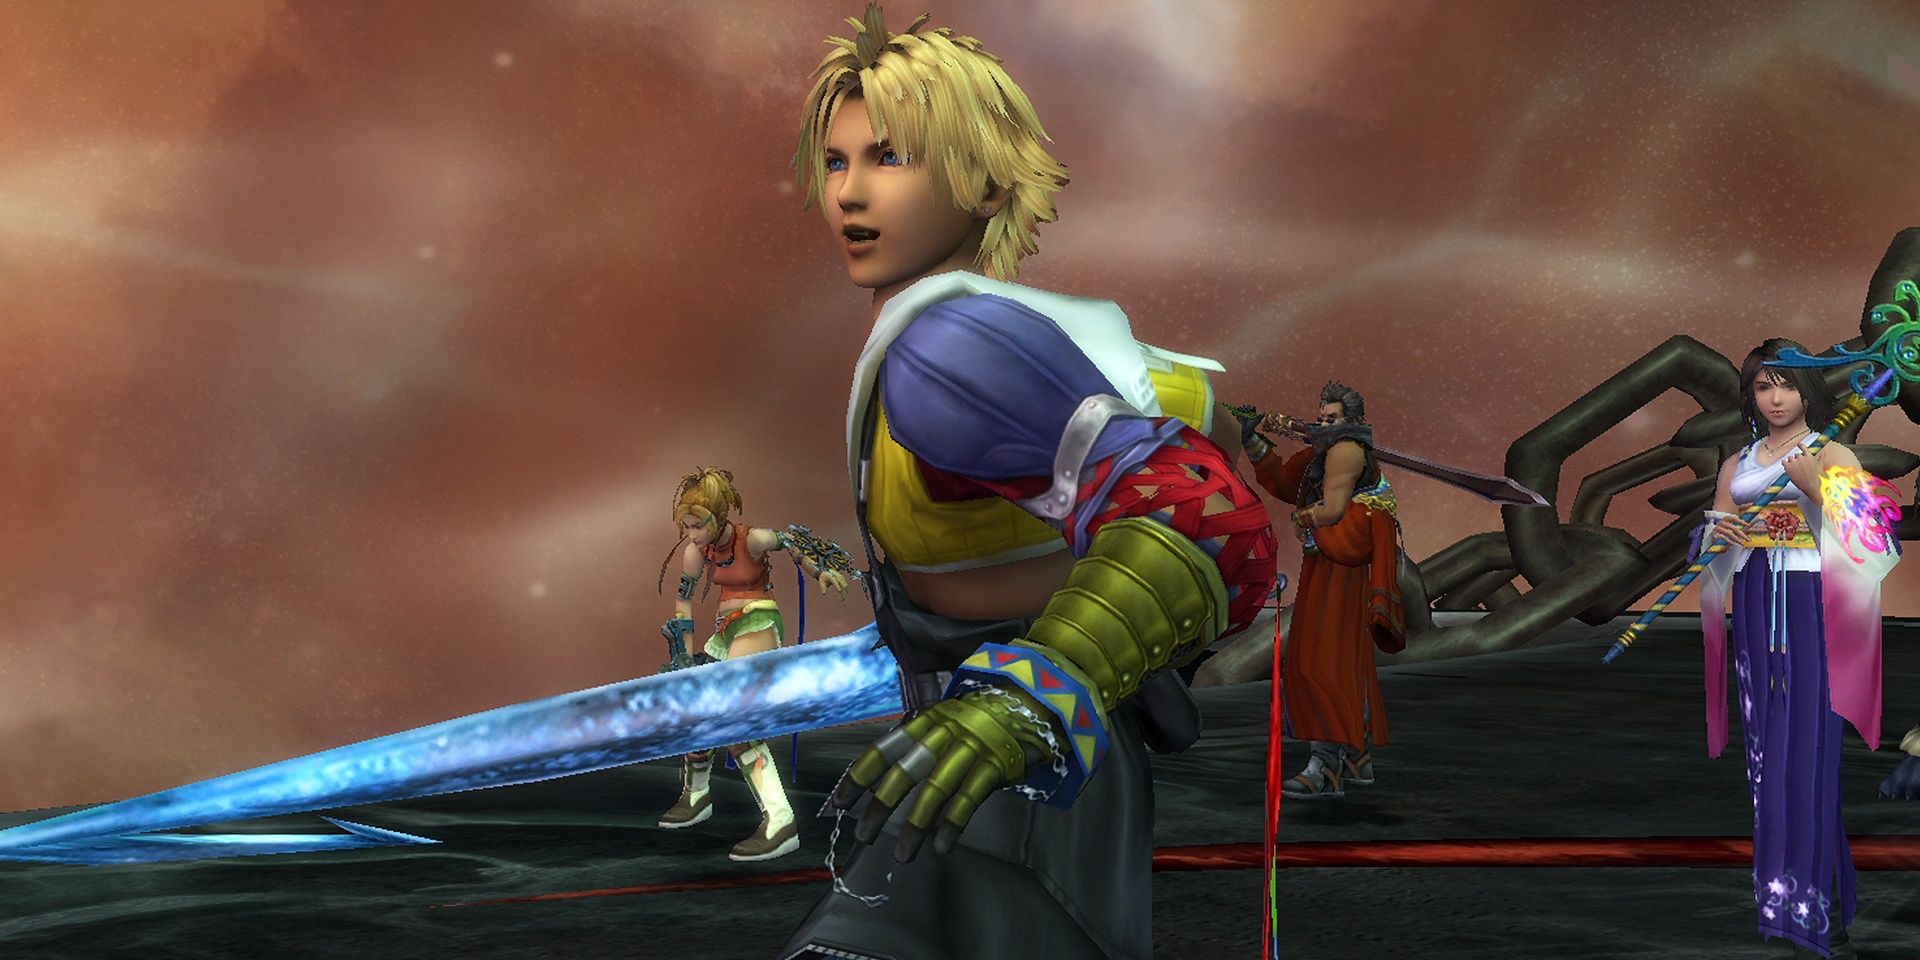 Final Fantasy X's ending with Tidus